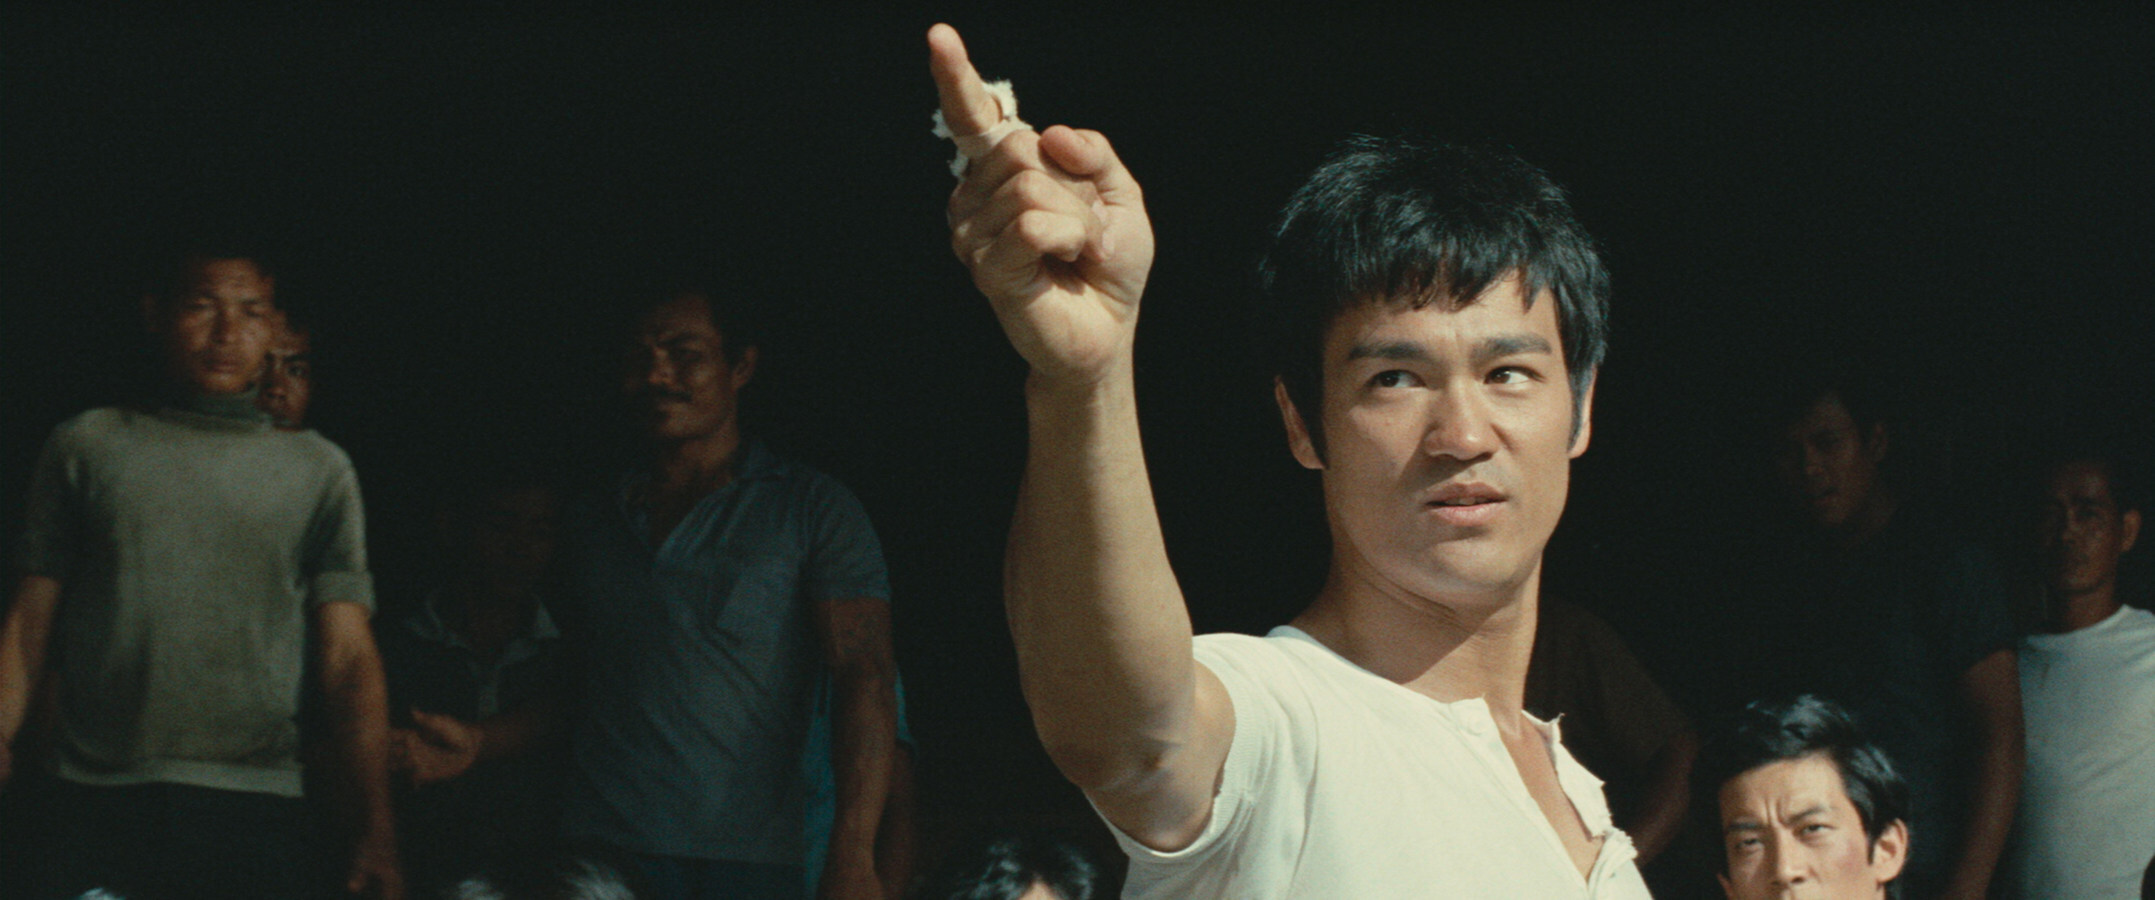 Bruce Lee in a still from The Big Boss (1971). Photo: Criterion Collection